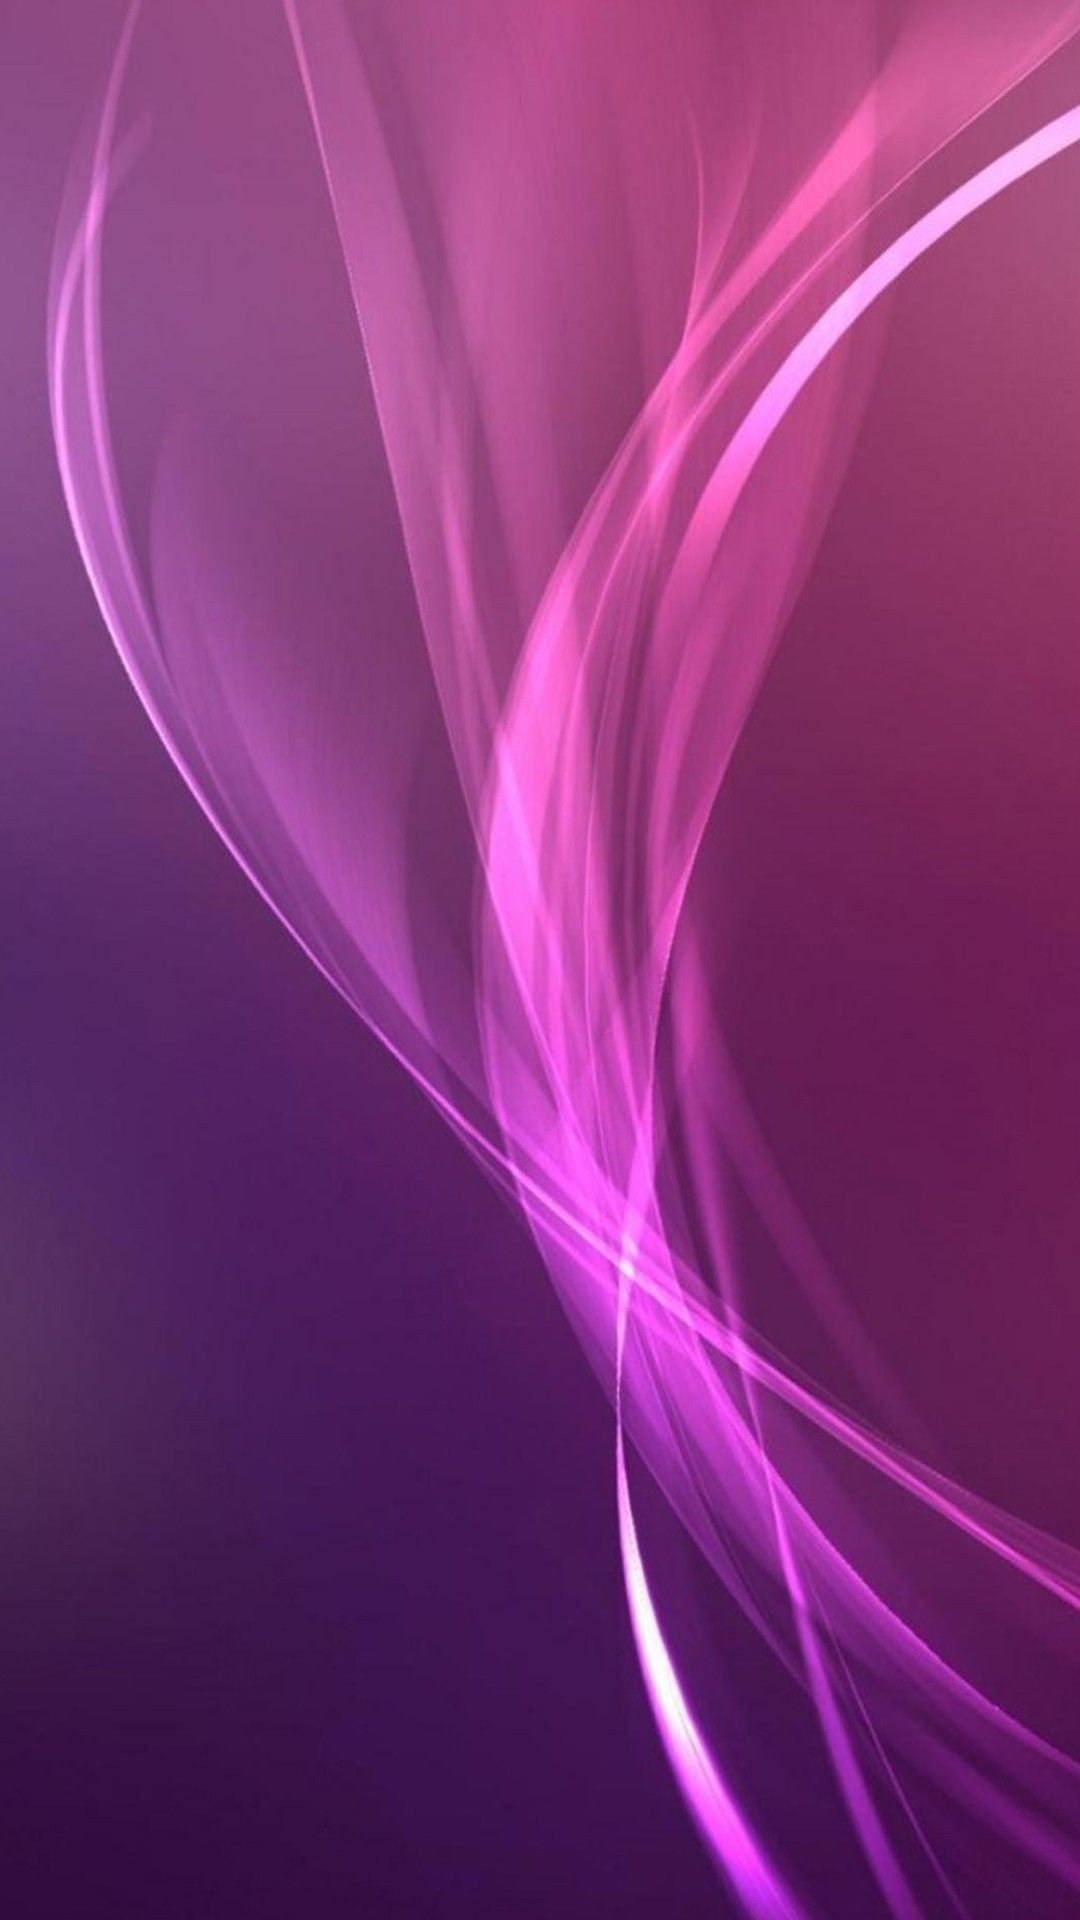 1080x1920 Purple translucent curves Mobile Wallpaper | Pretty wallpapers backgrounds, New wallpaper iphone, Abstract